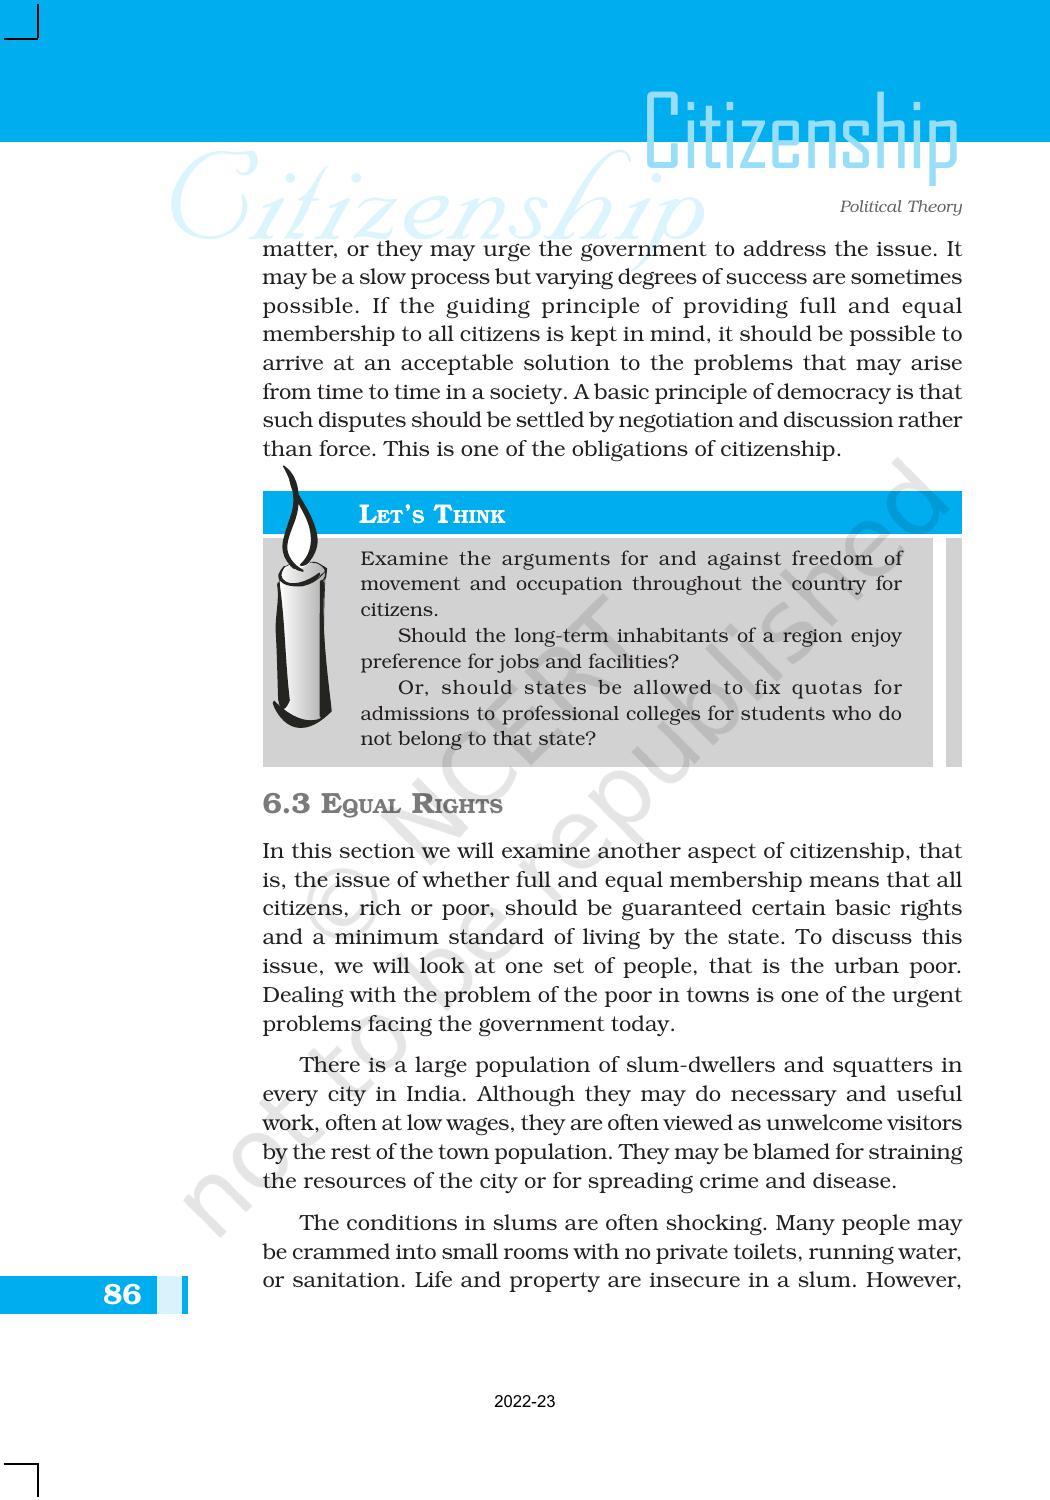 NCERT Book for Class 11 Political Science (Political Theory) Chapter 6 Citizenship - Page 8